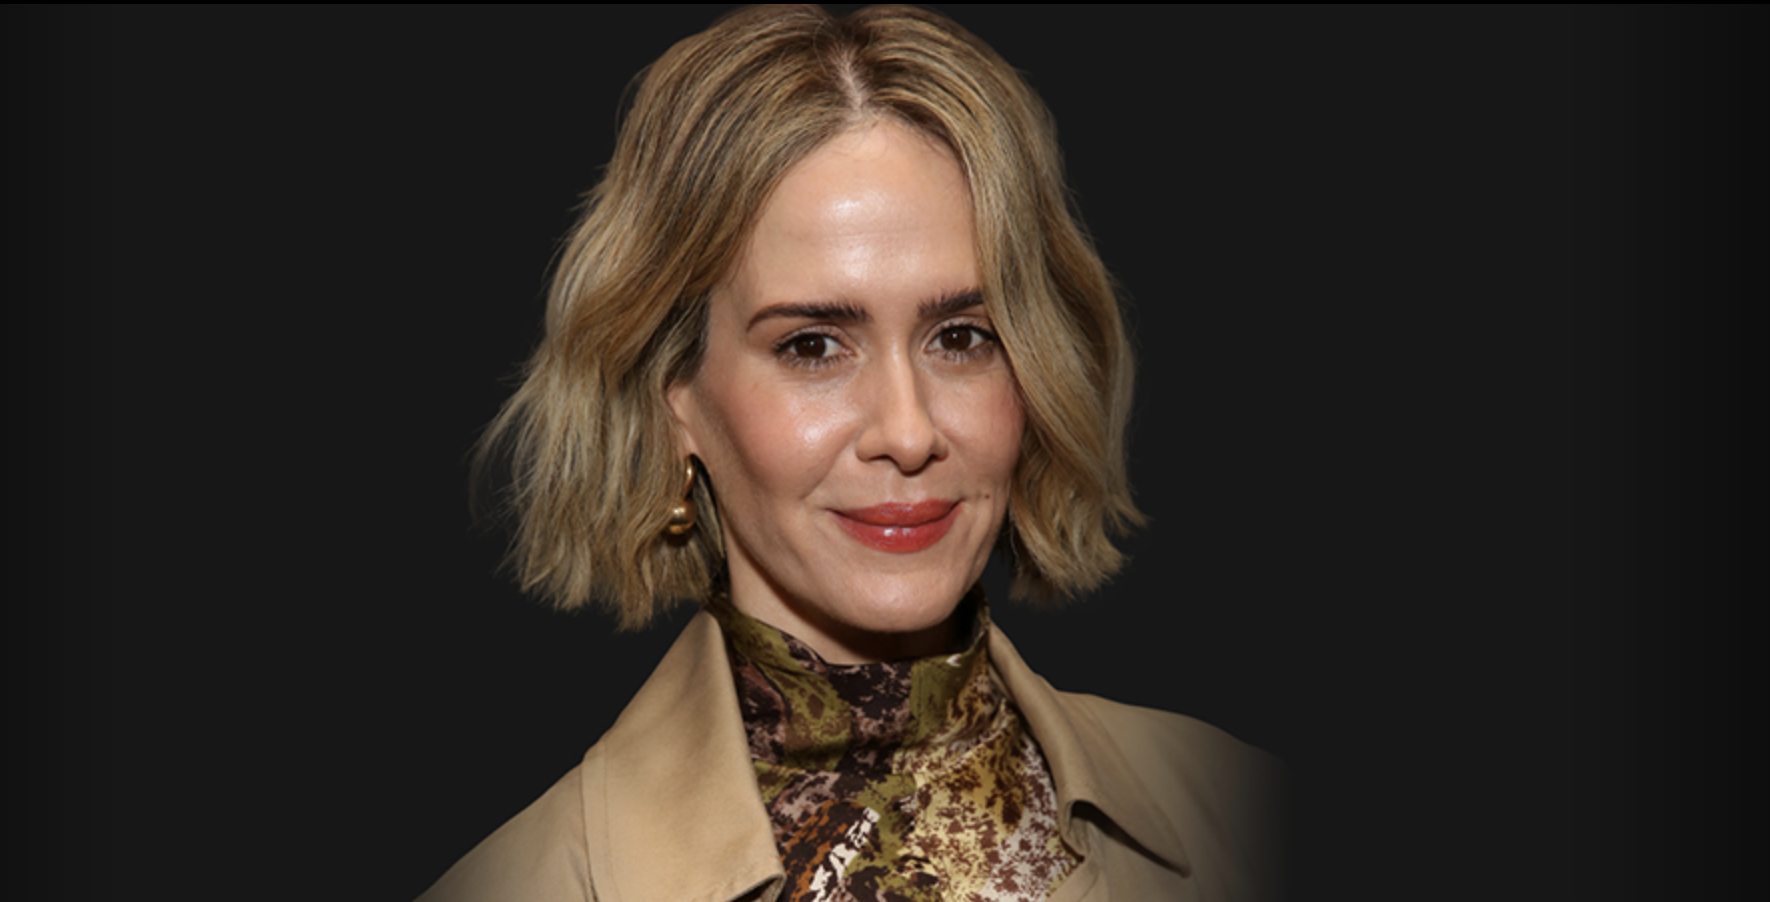 Sarah Paulson Returns to Broadway in Branden Jacobs-Jenkins' Appropriate at Second Stage Theater